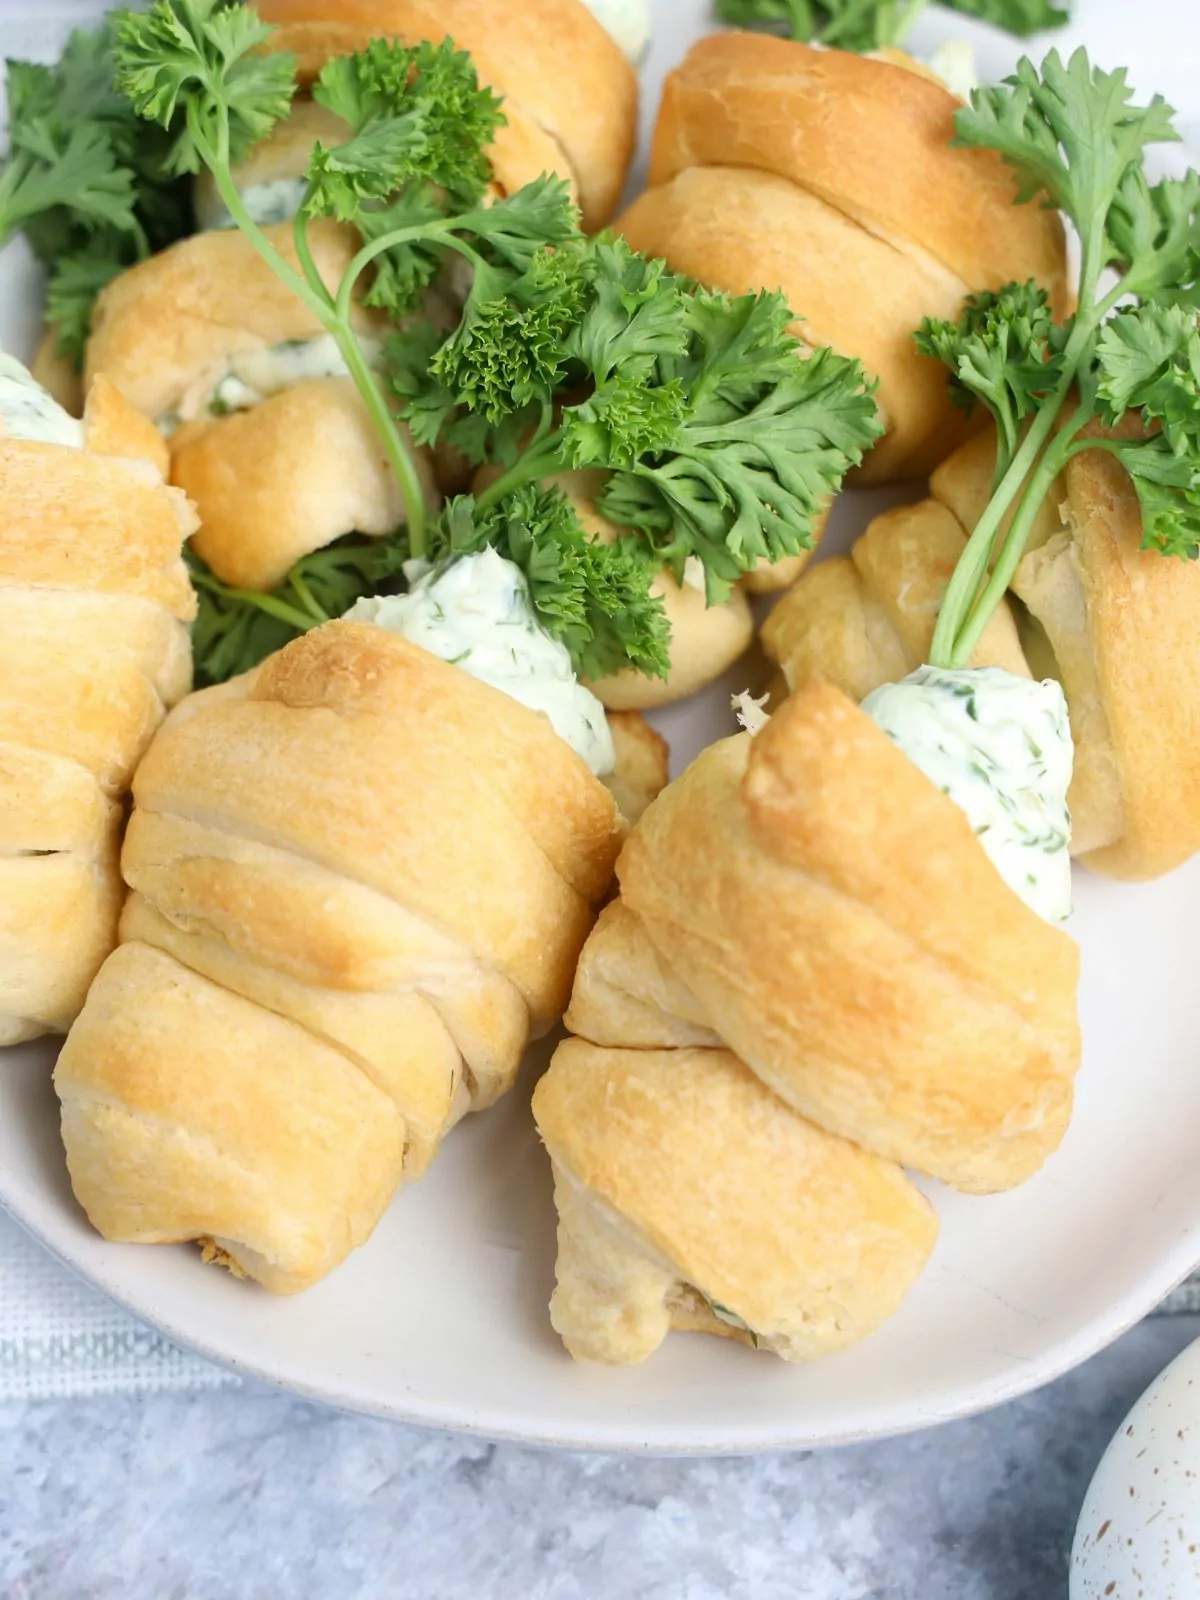 baked carrot shaped crescent rolls on plate.